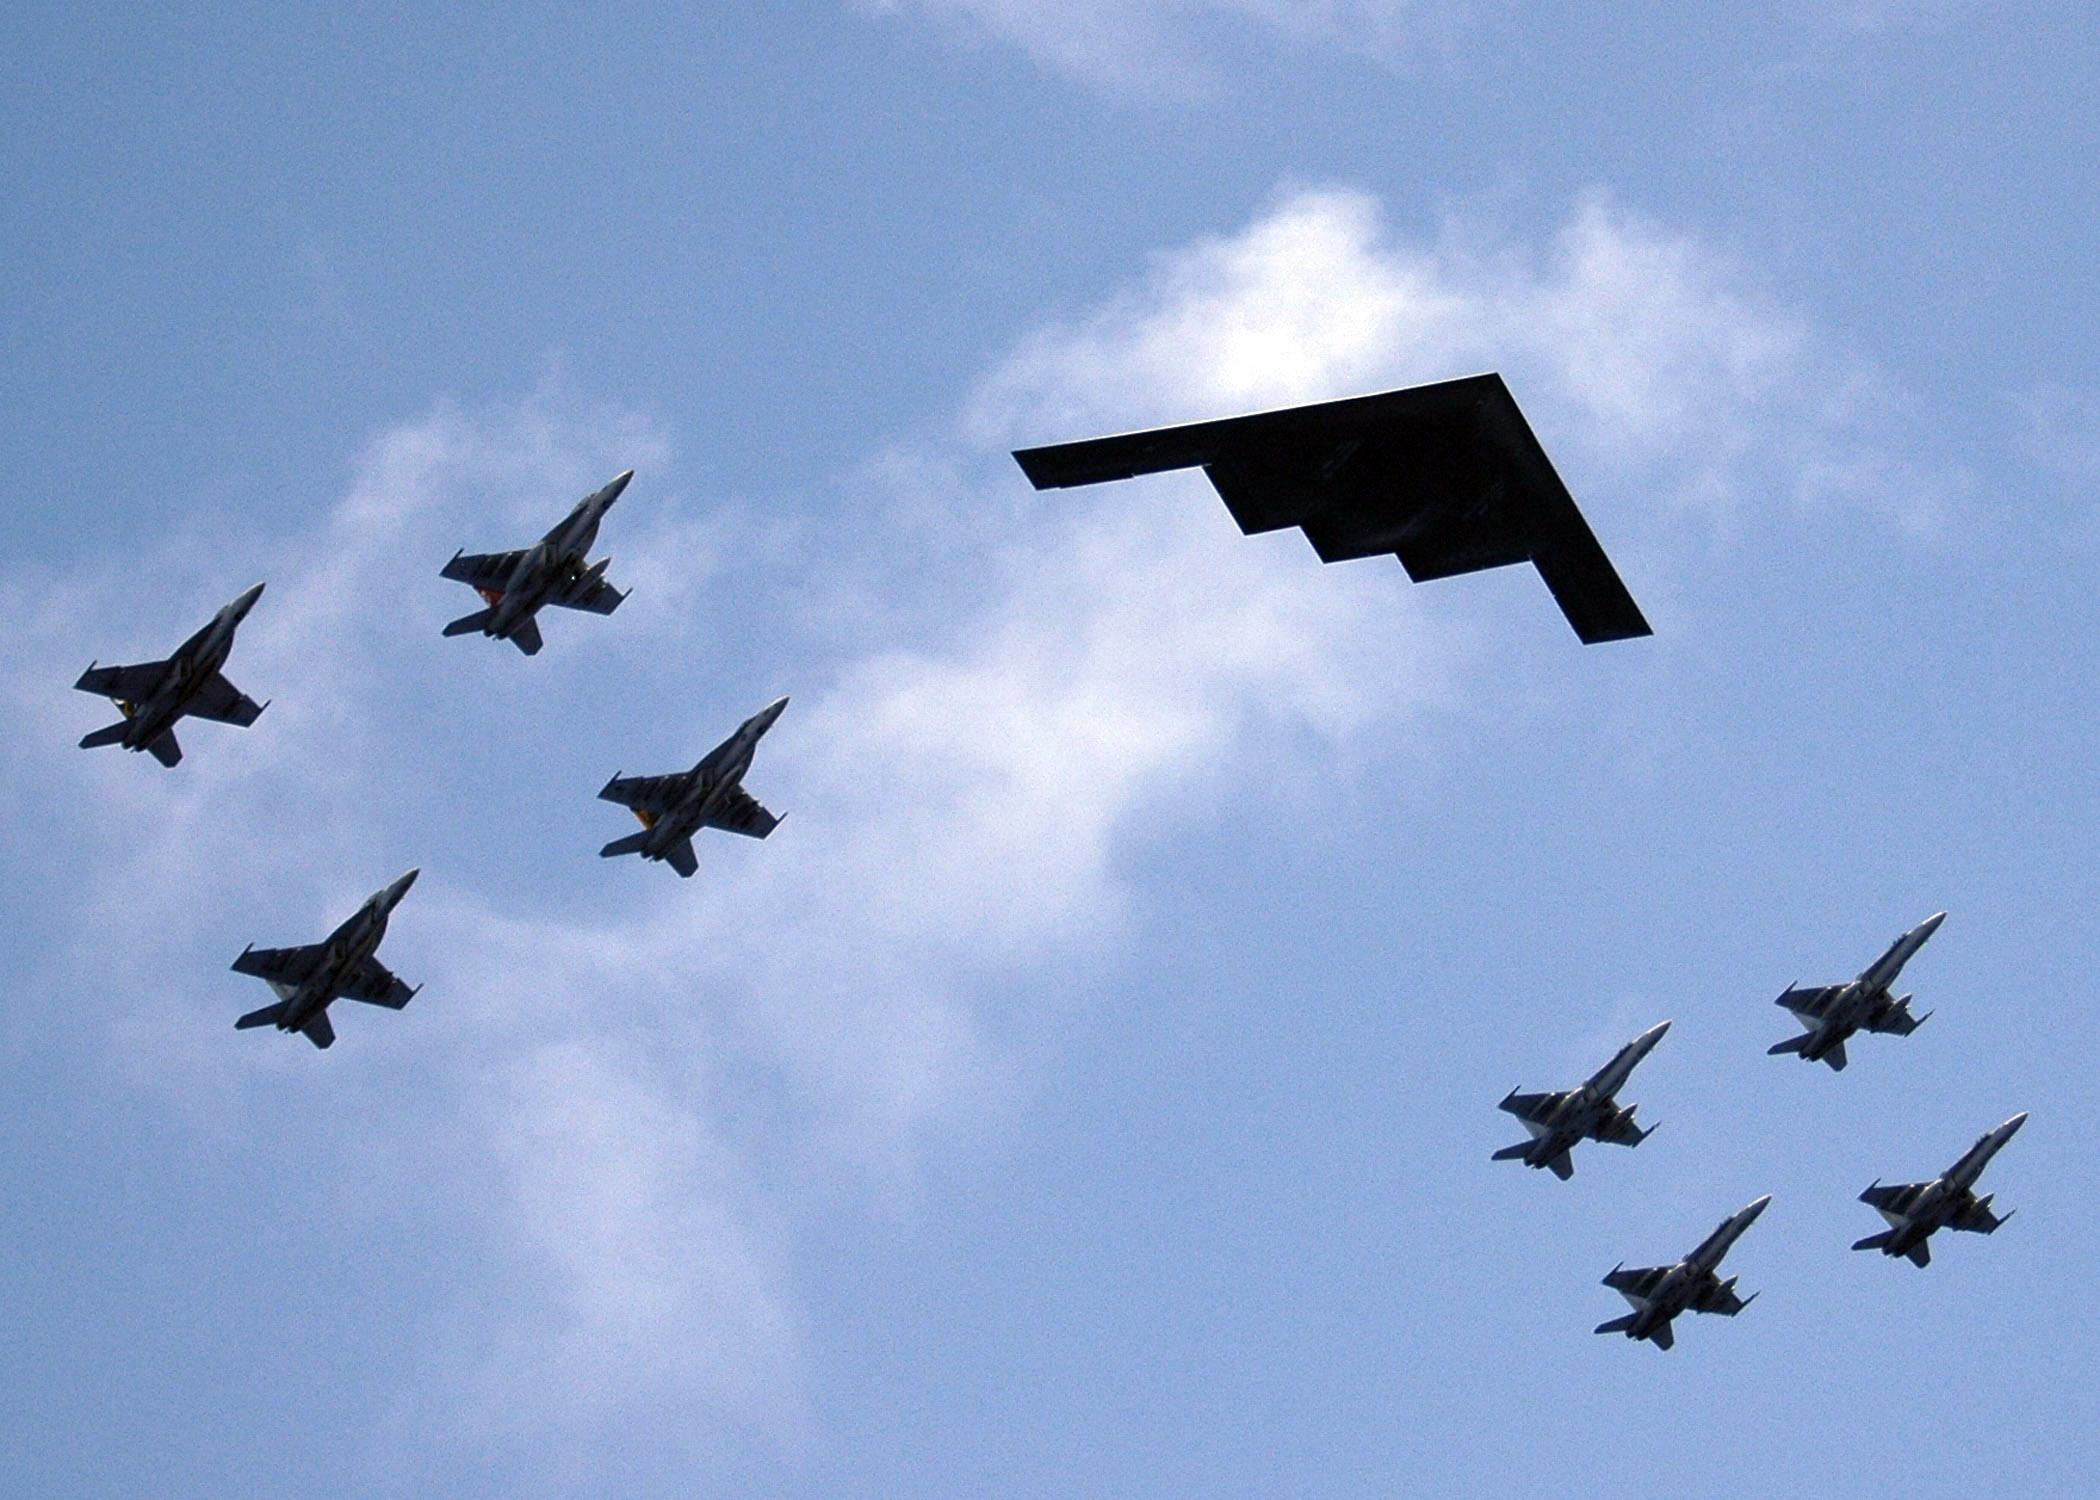 A B-2 Stealth Bomber from Whiteman AFB in Missouri leads an aerial flight formation with F-18 Hornets from the during exercise Valiant Shield 2006. US Navy Photo